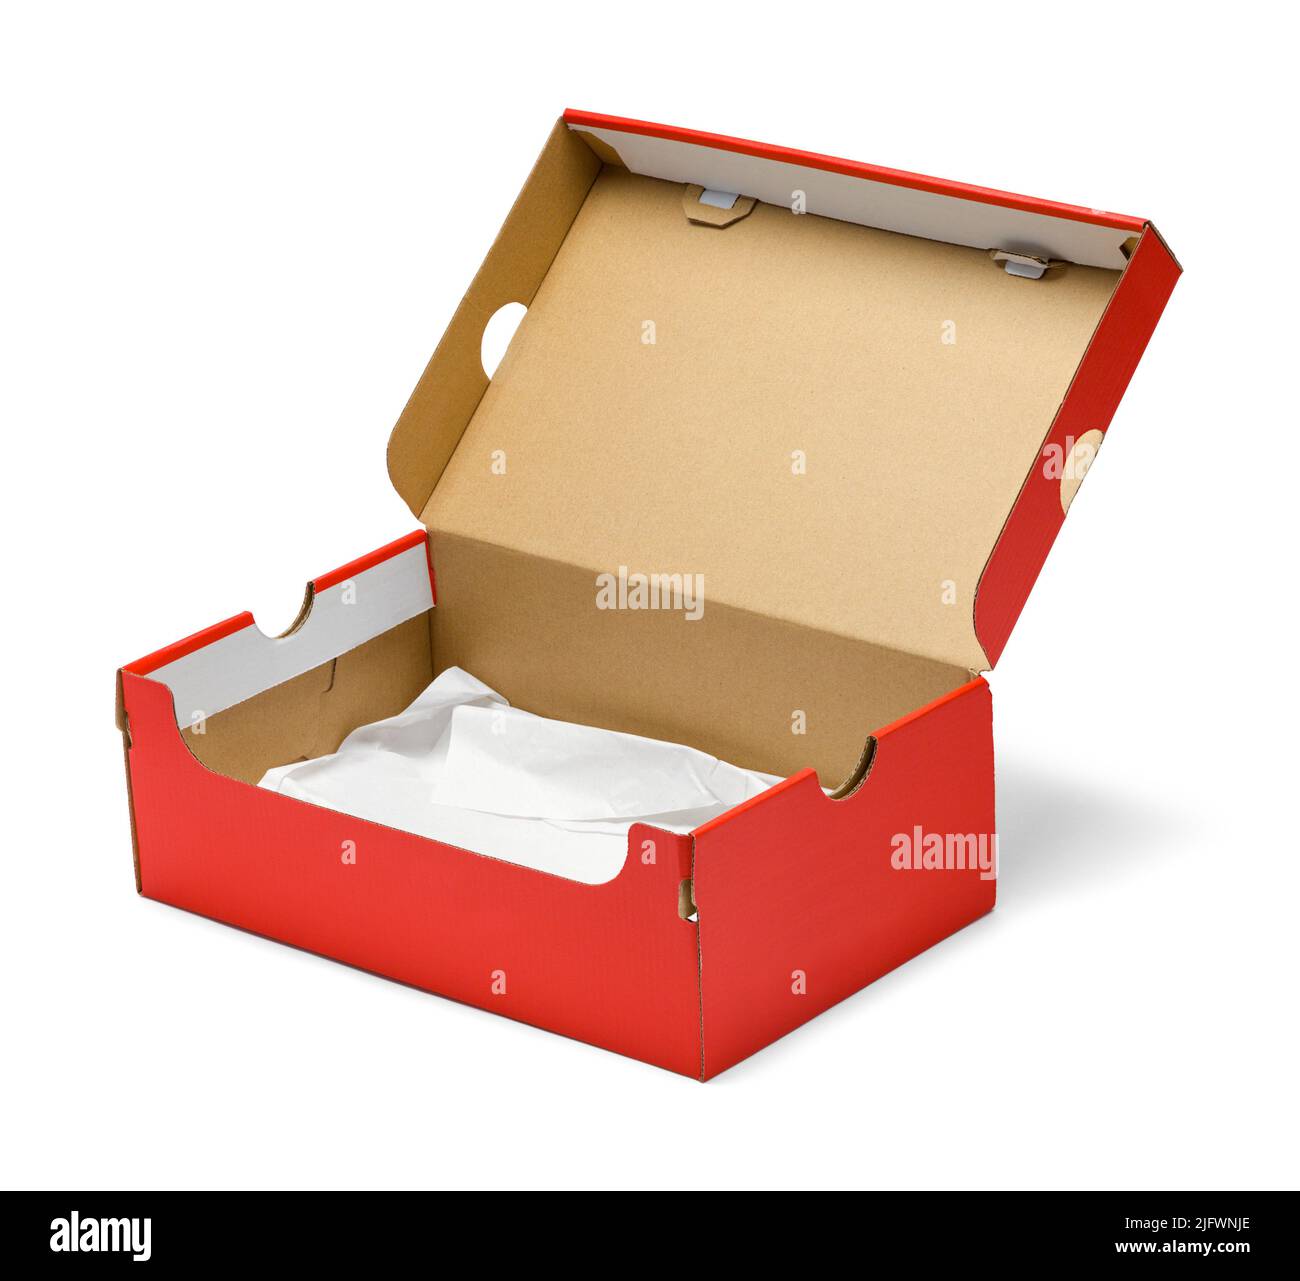 Red Open Shoe Box Cut Out on White. Stock Photo